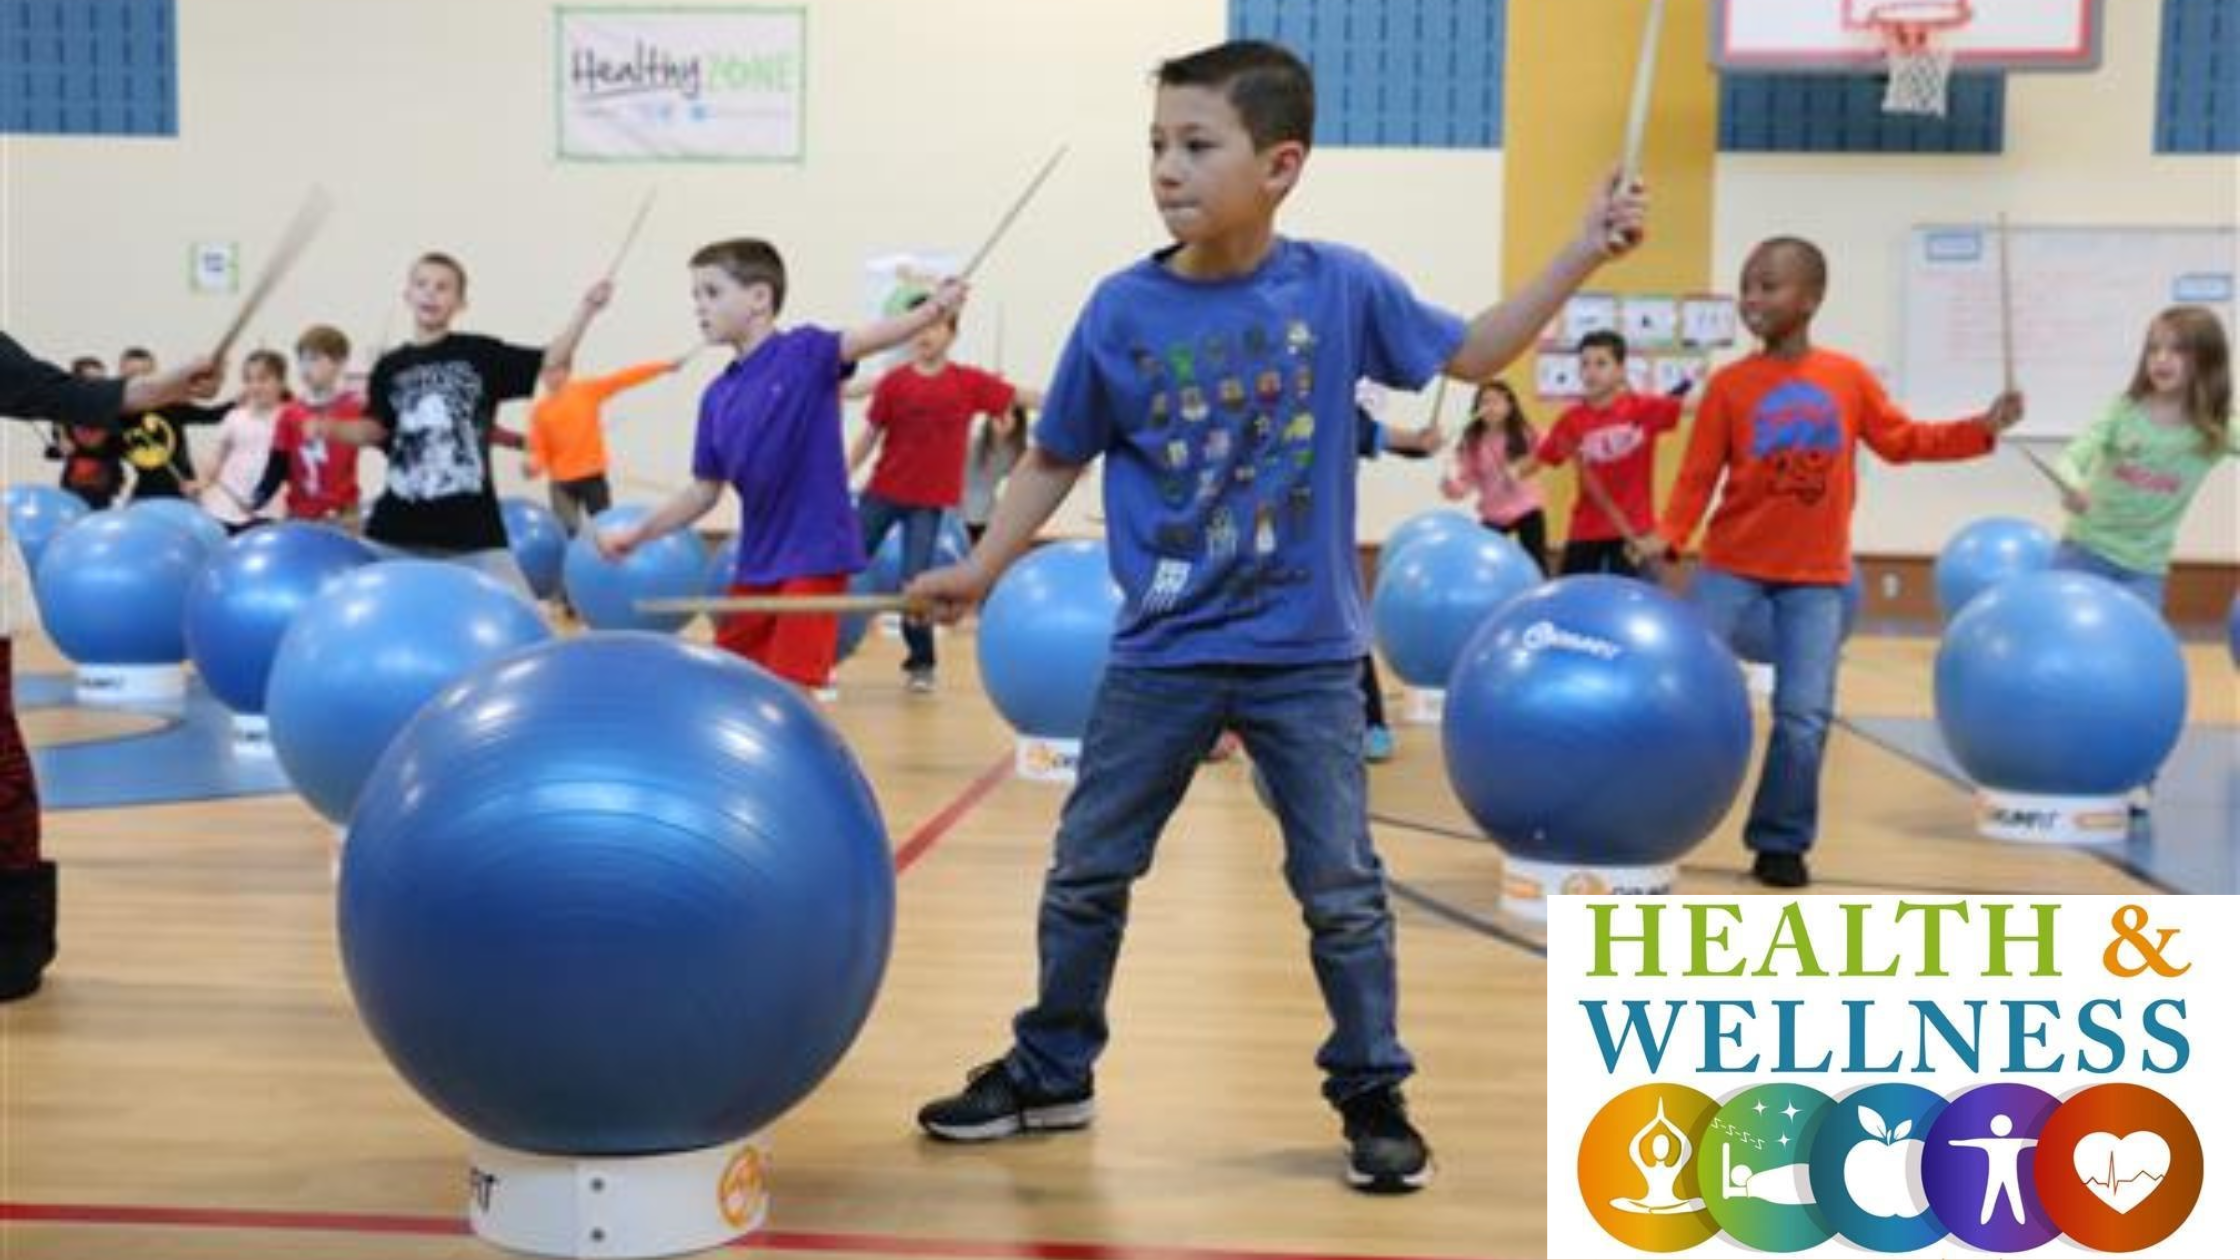 Health and Wellness Education for Elementary Students